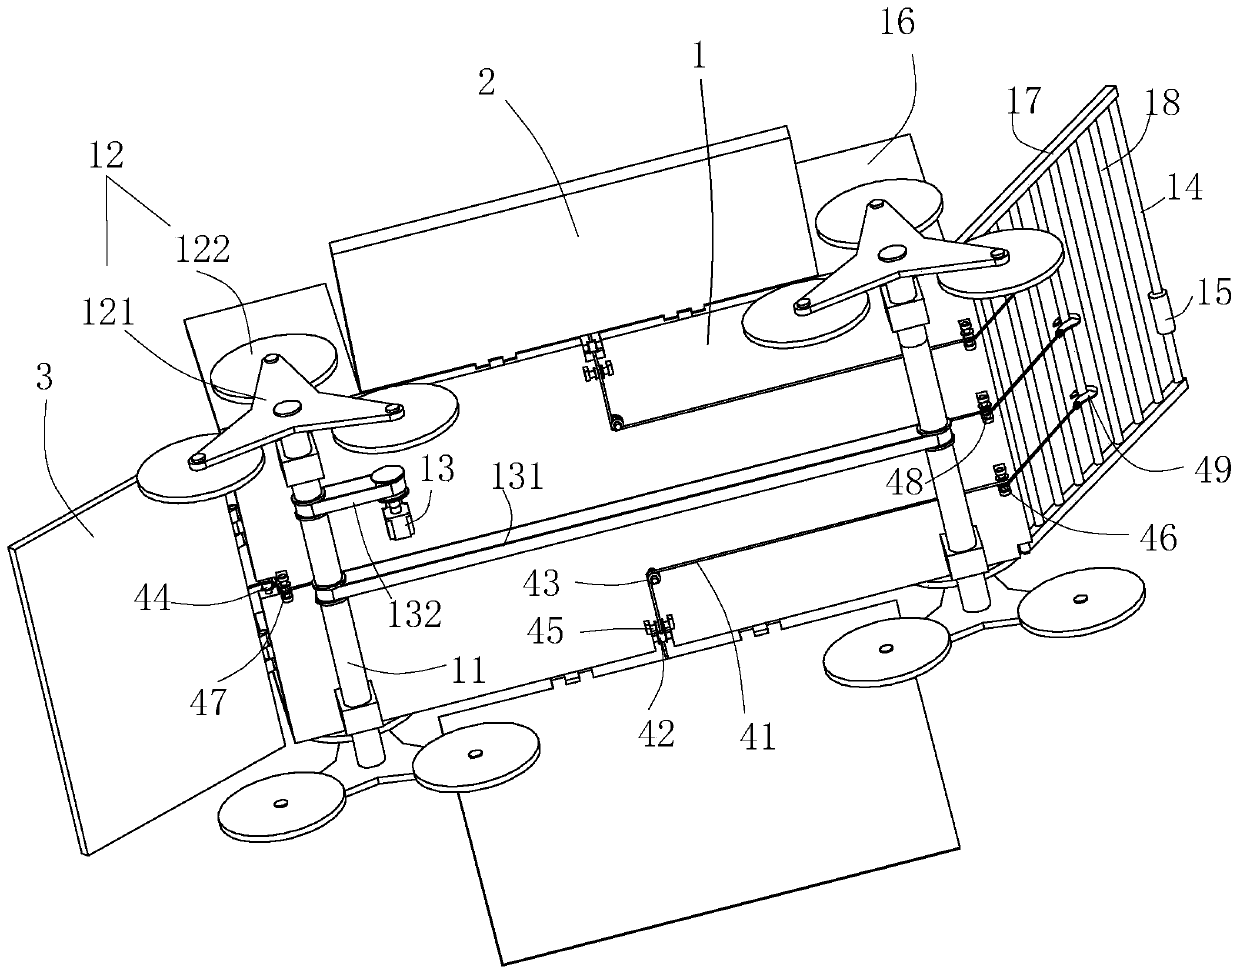 Electric power assisted carrying device for stair